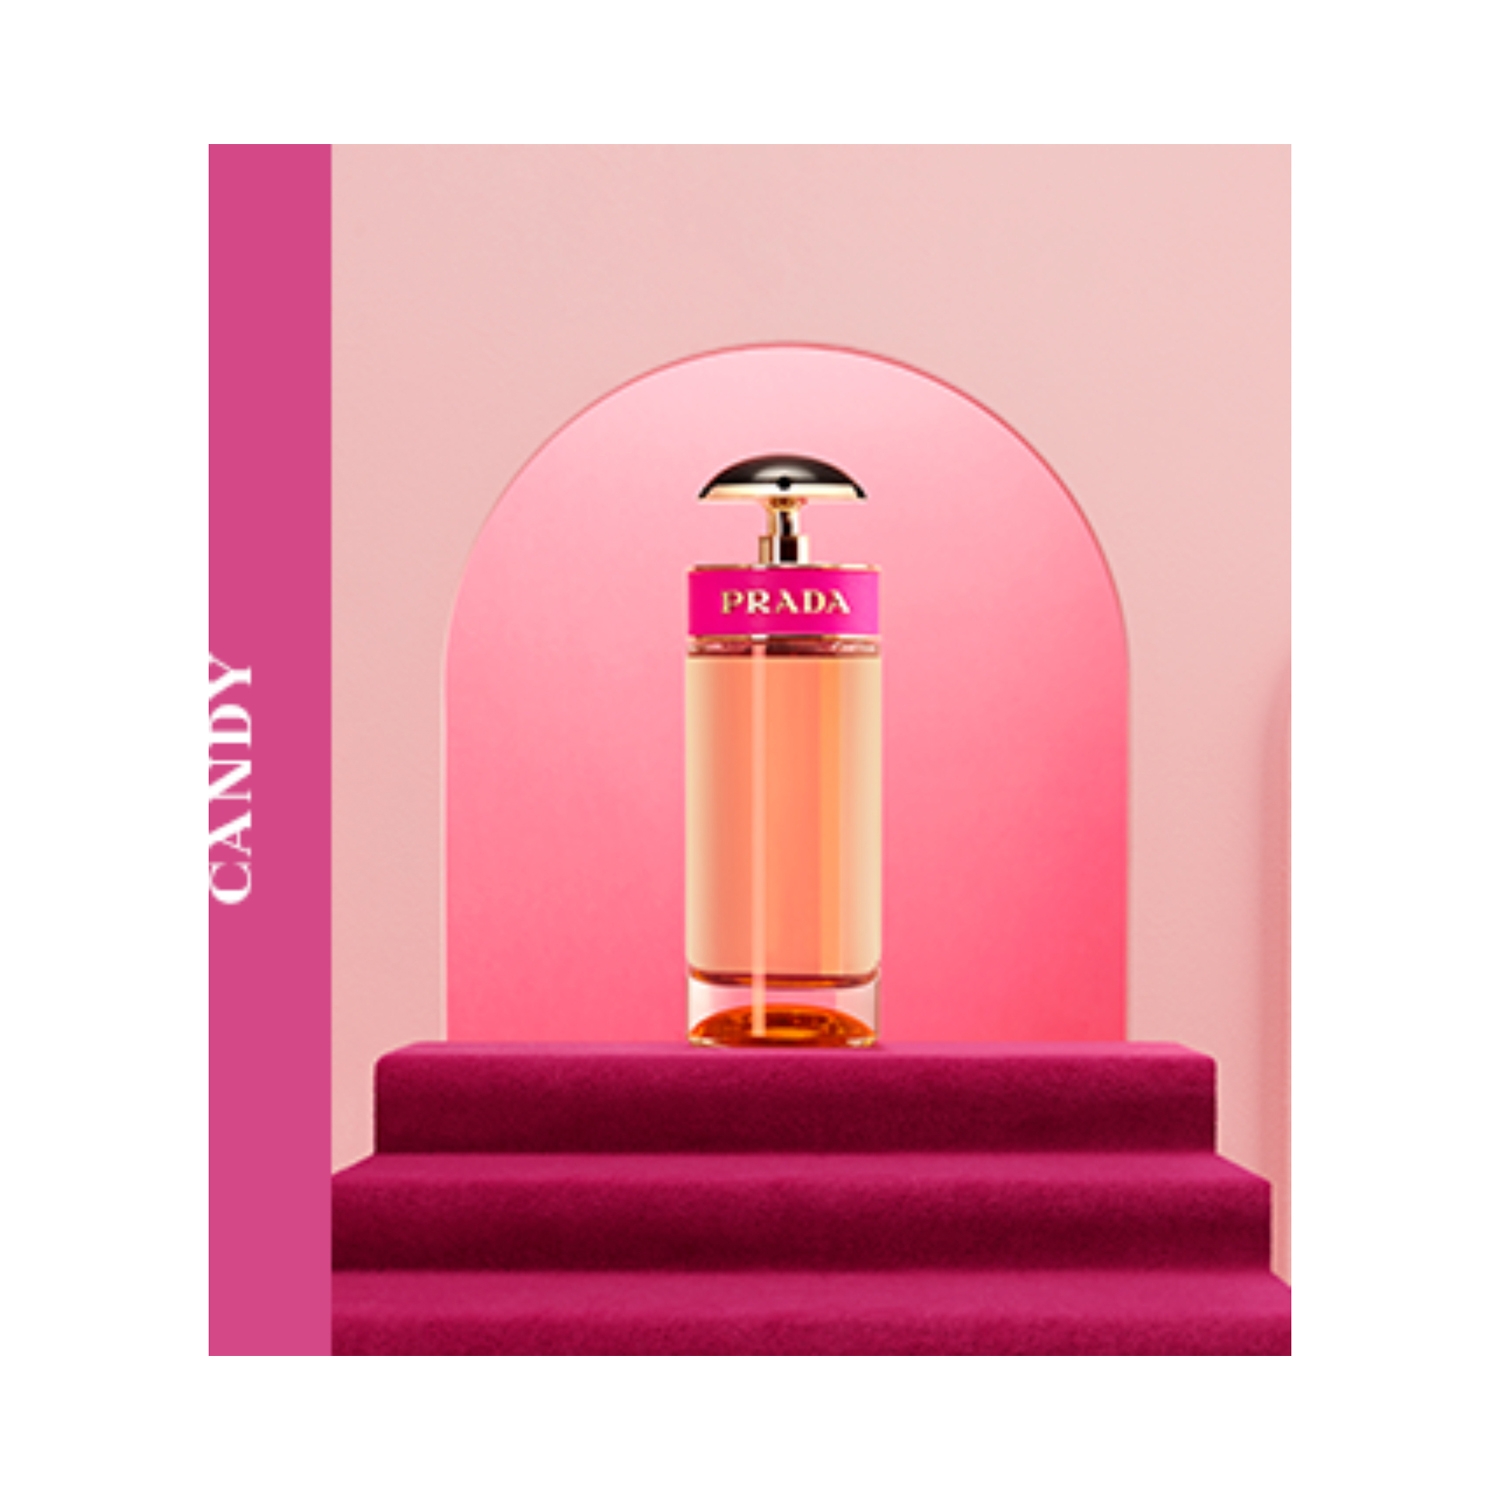 Prada Candy perfume is pure temptation in a bottle